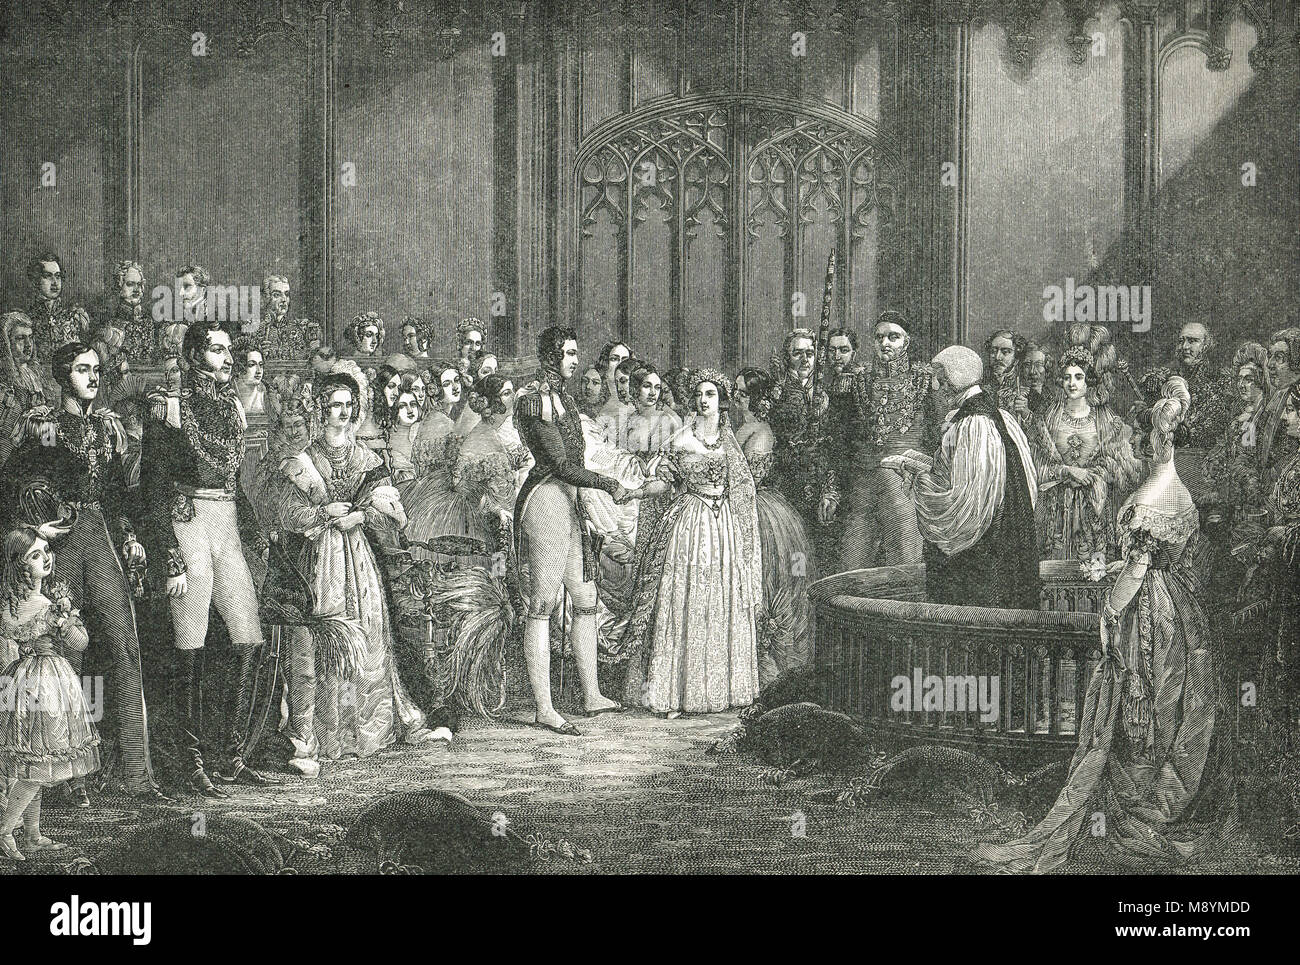 Marriage of Queen Victoria and Prince Albert, 10 February 1840 Stock Photo